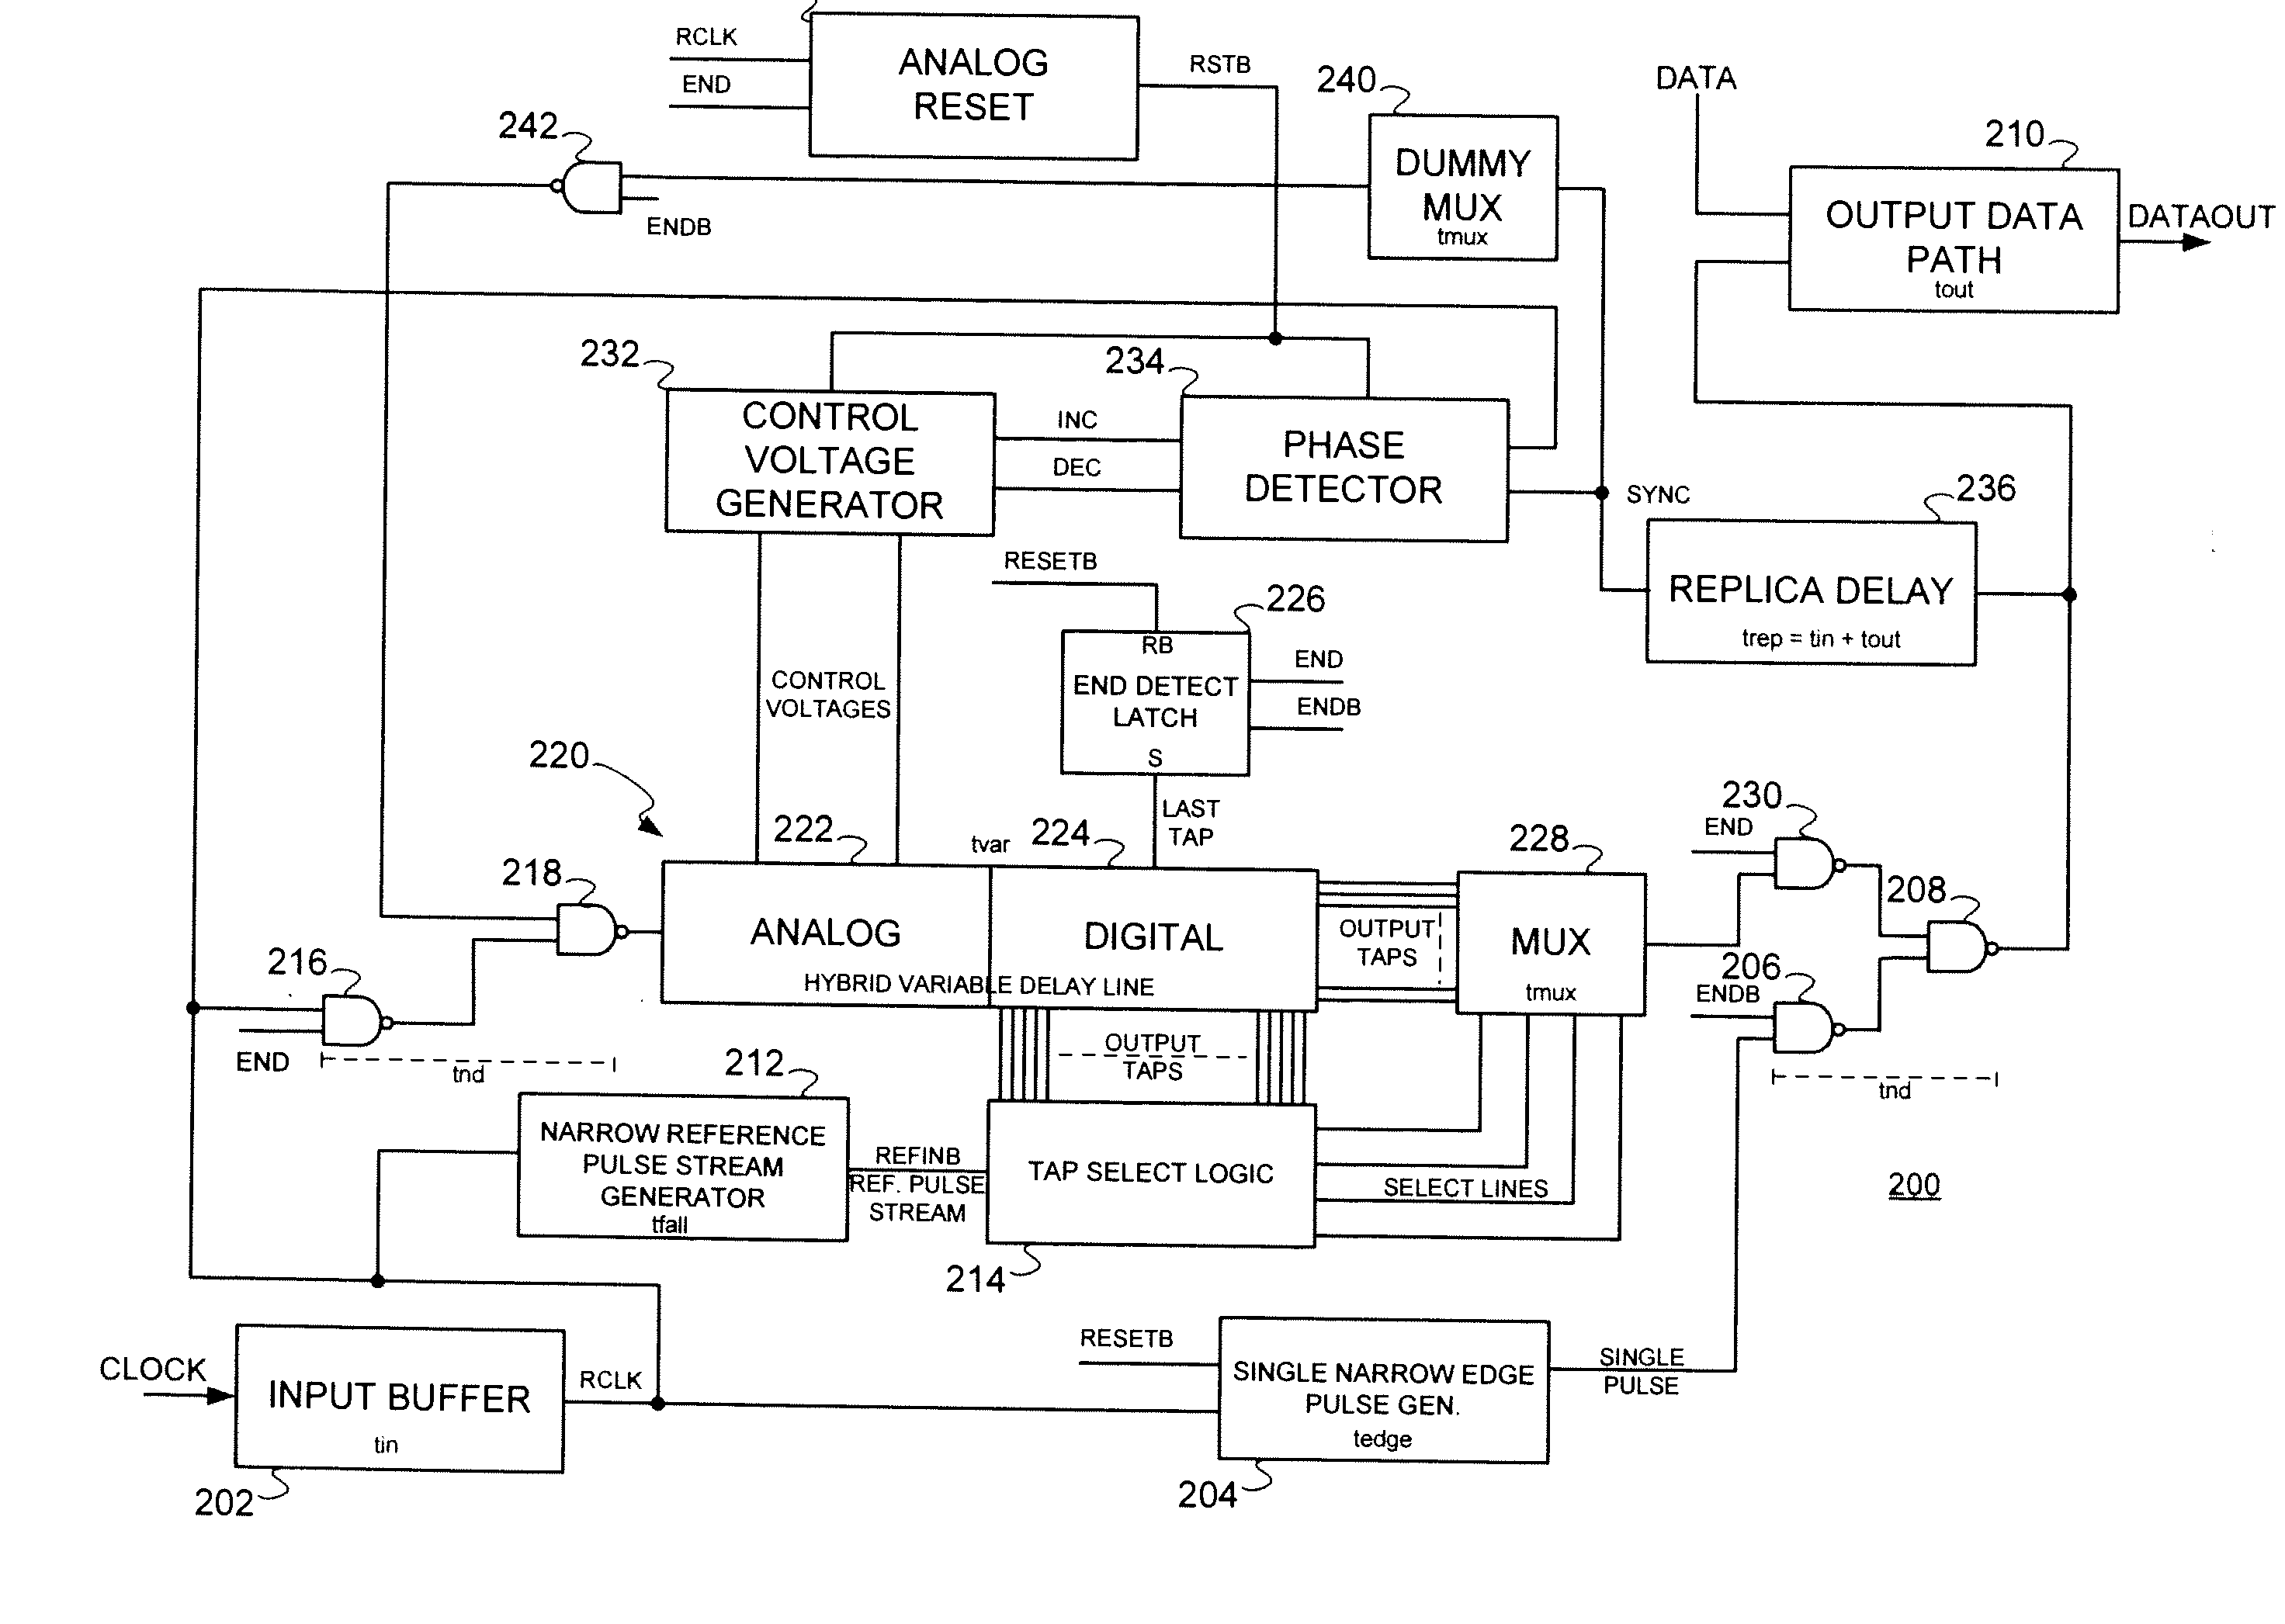 Configurable architecture hybrid analog/digital delay locked loop (DLL) and technique with fast open loop digital locking for integrated circuit devices